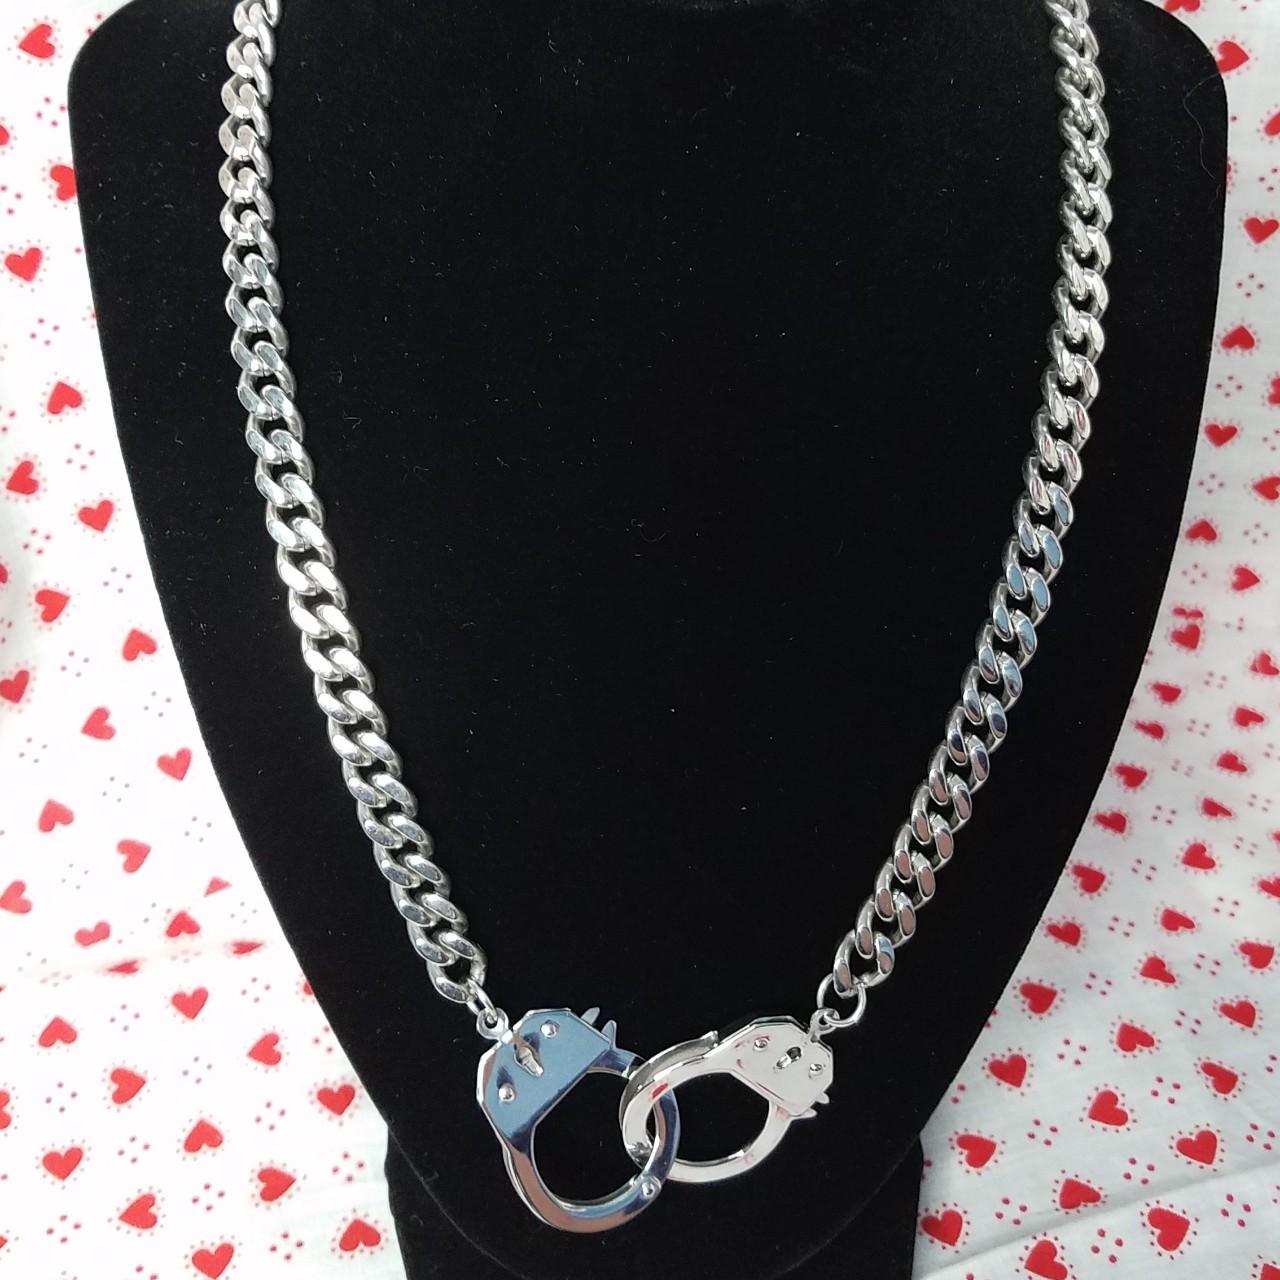 Product Image 1 - Stainless Steel Handcuff Necklace

This rad